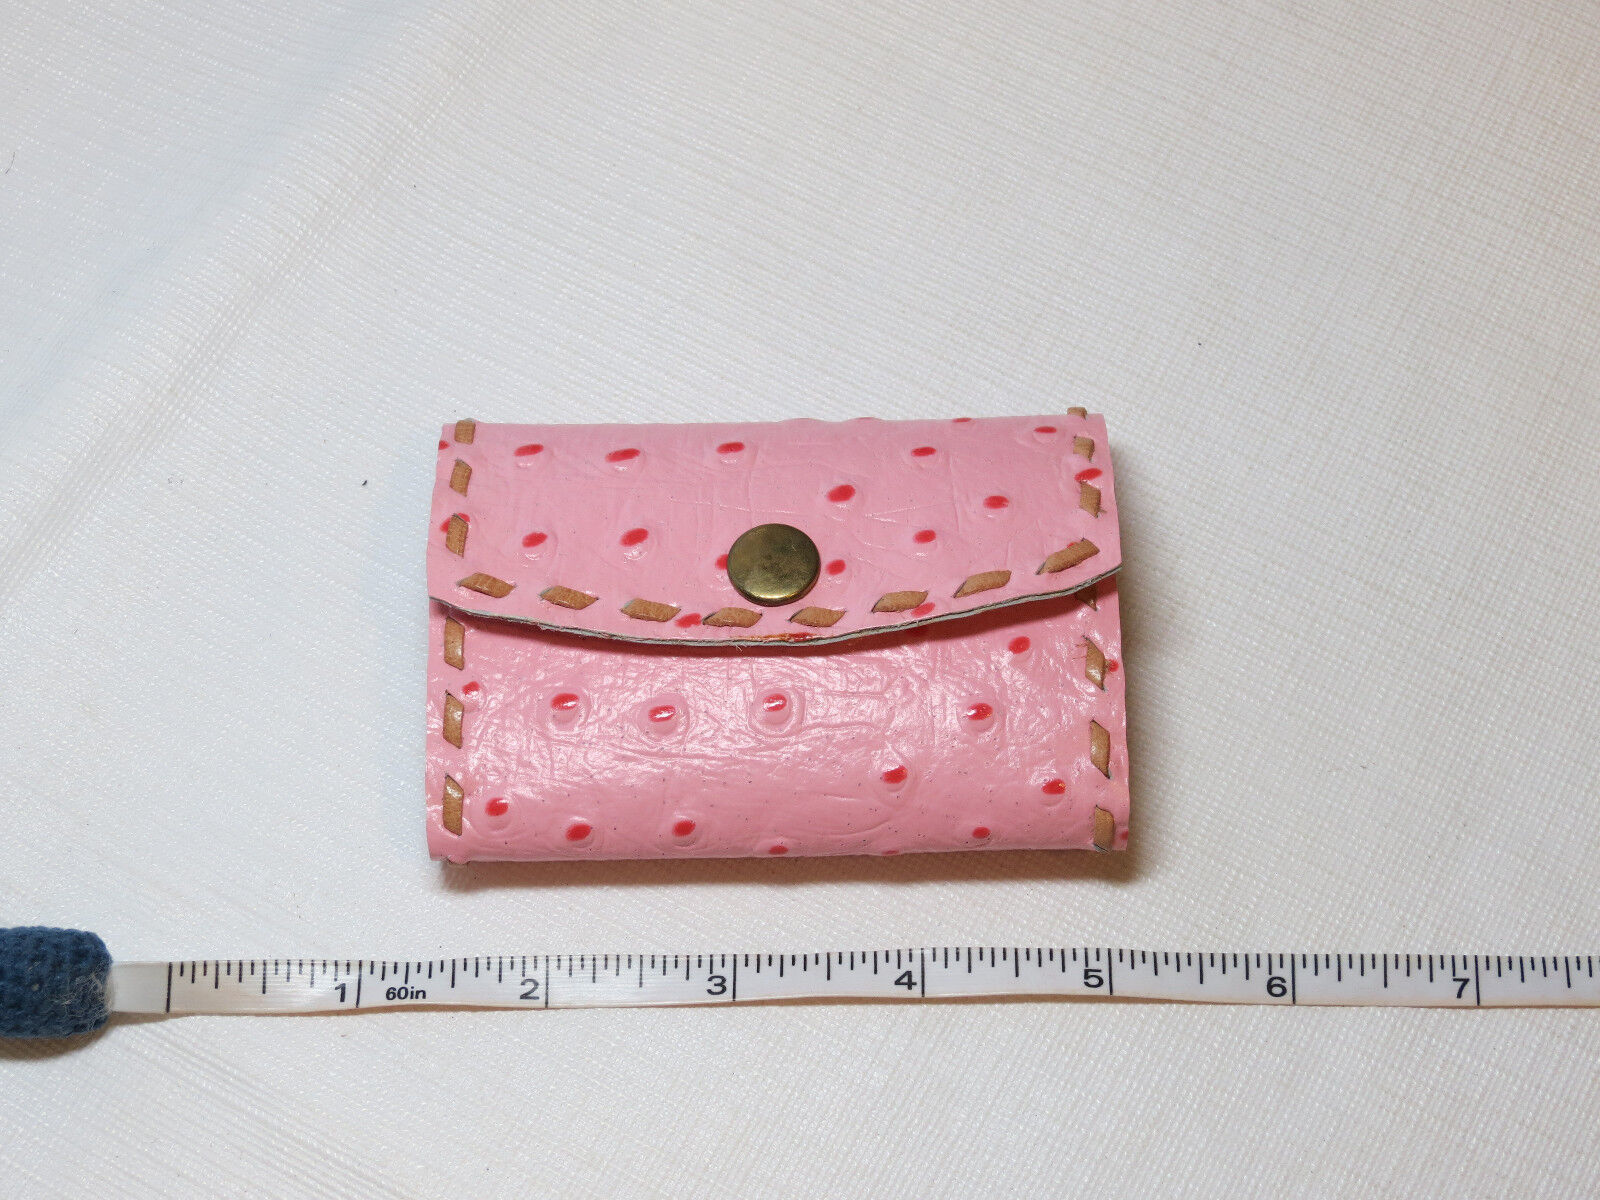 Primary image for Handmade leather key holder pink w/ tan stitching 3.5" X 2.5" ostrich print